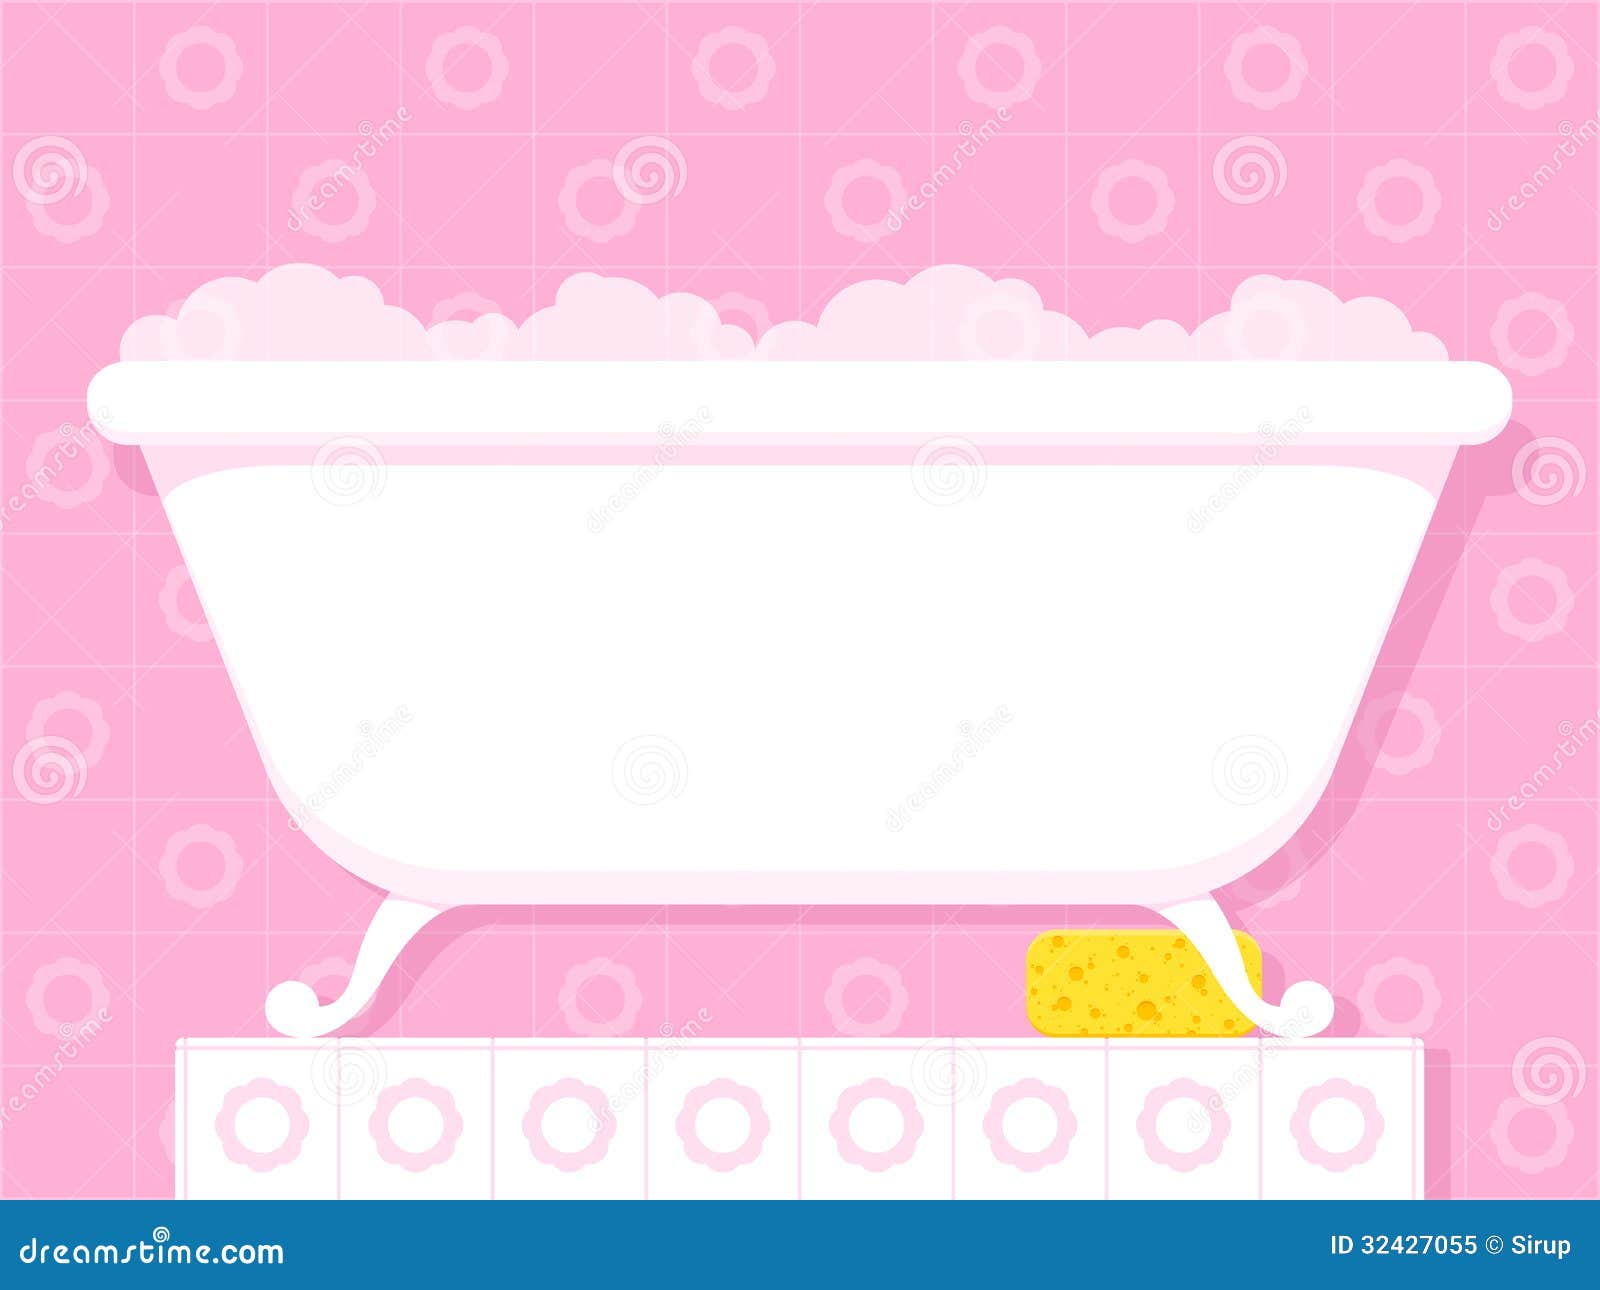 vintage style bathtub with soapy bubbles